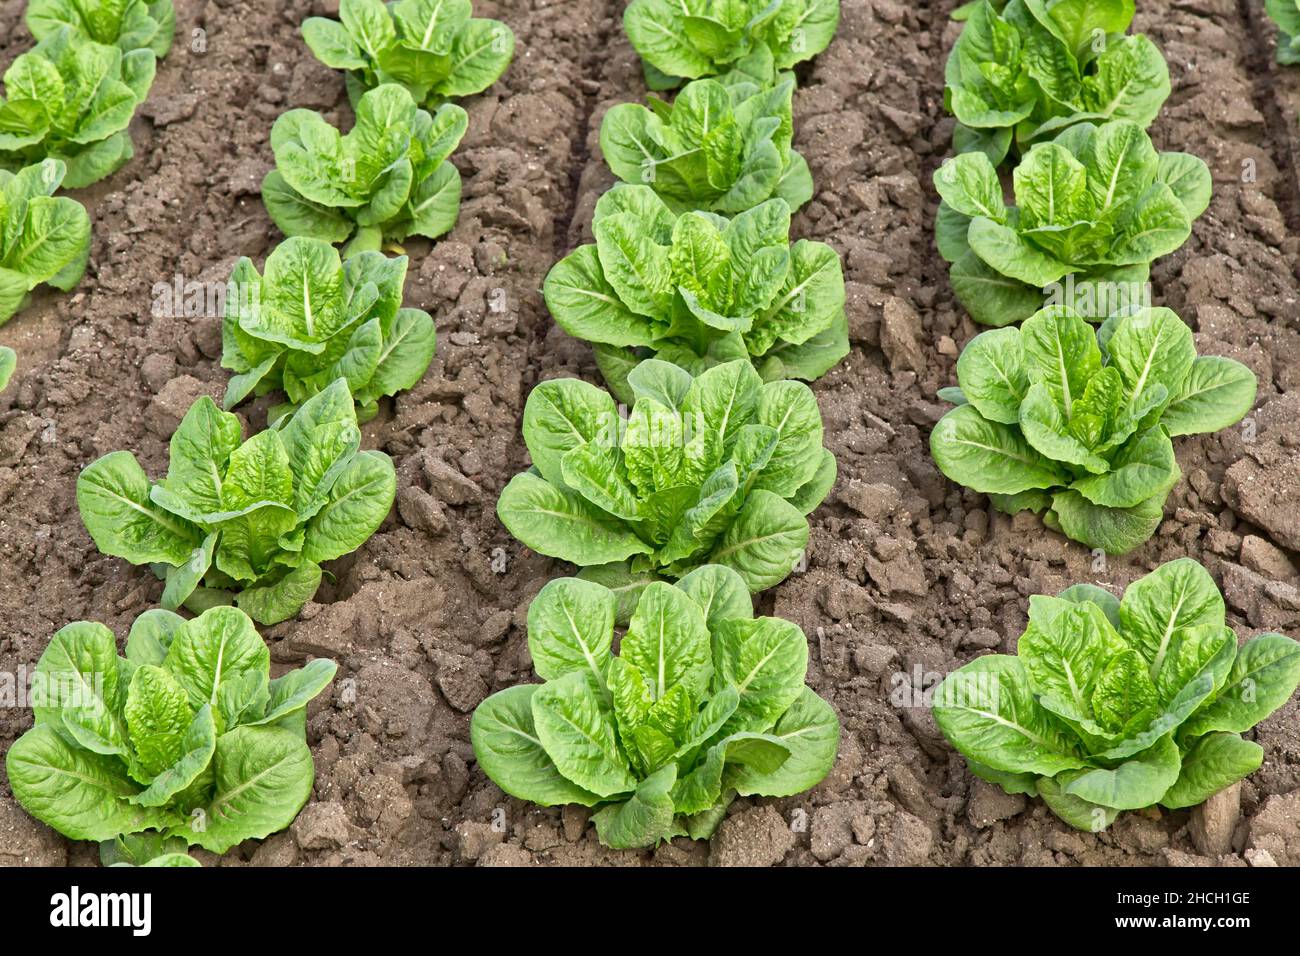 Young Romaine Lettuce plants growing in field 'Lactuca sativa'. Stock Photo